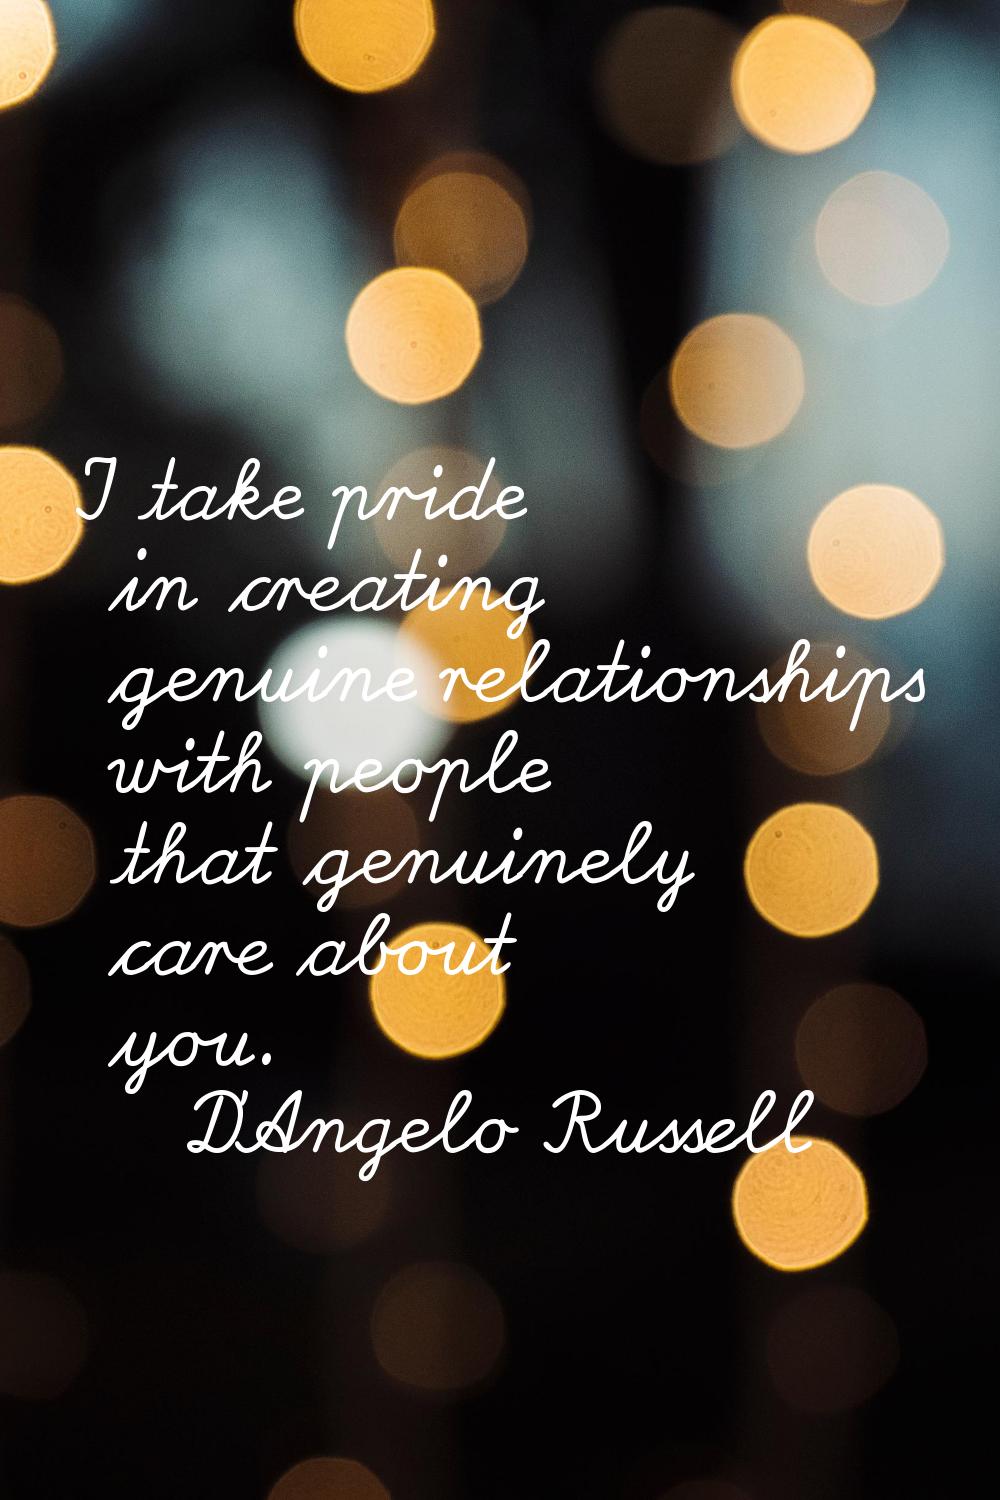 I take pride in creating genuine relationships with people that genuinely care about you.